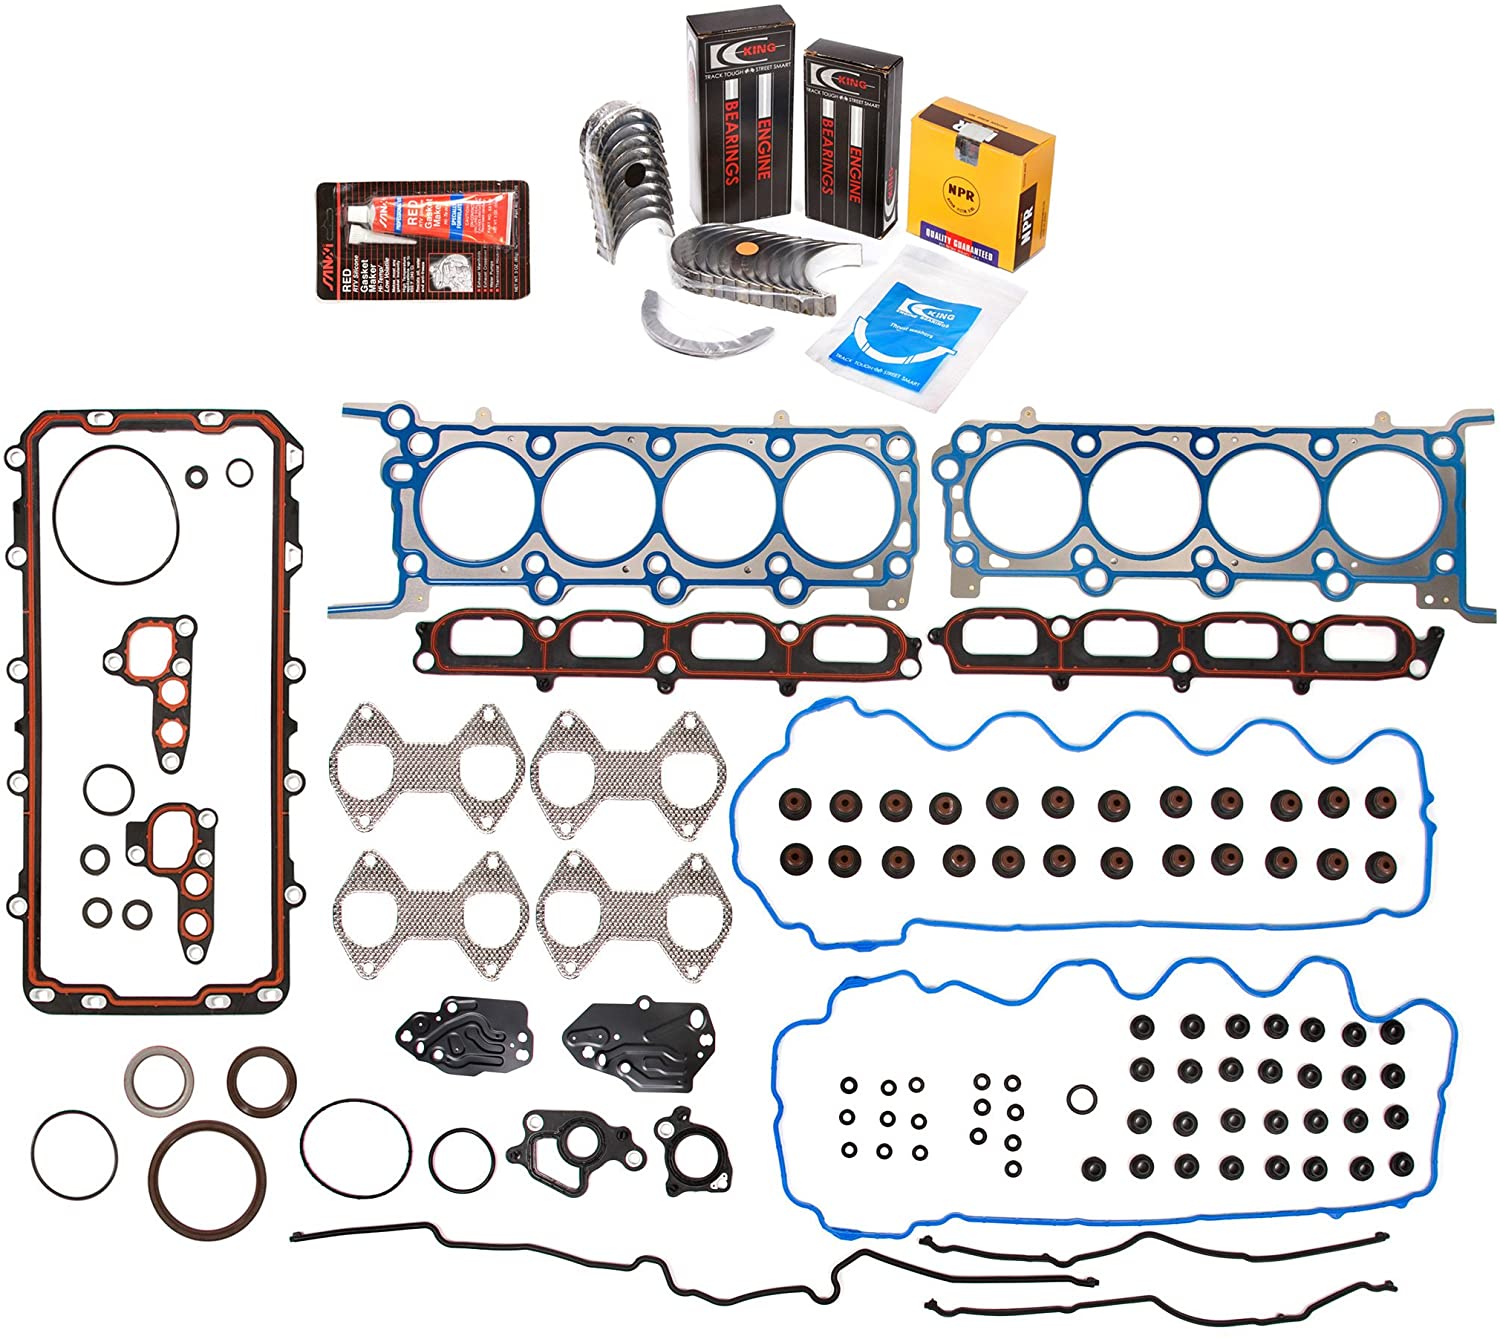 Evergreen Engine Rering Kit FSBRR8-21200��� Compatible With 04-06 Ford F150 F250 Lincoln 5.4 TRITON 3 Valves Full Gasket Set, Standard Size Main Rod Bearings, Standard Size Piston Rings (Pistons Standard Main Standard | Rod Standard)